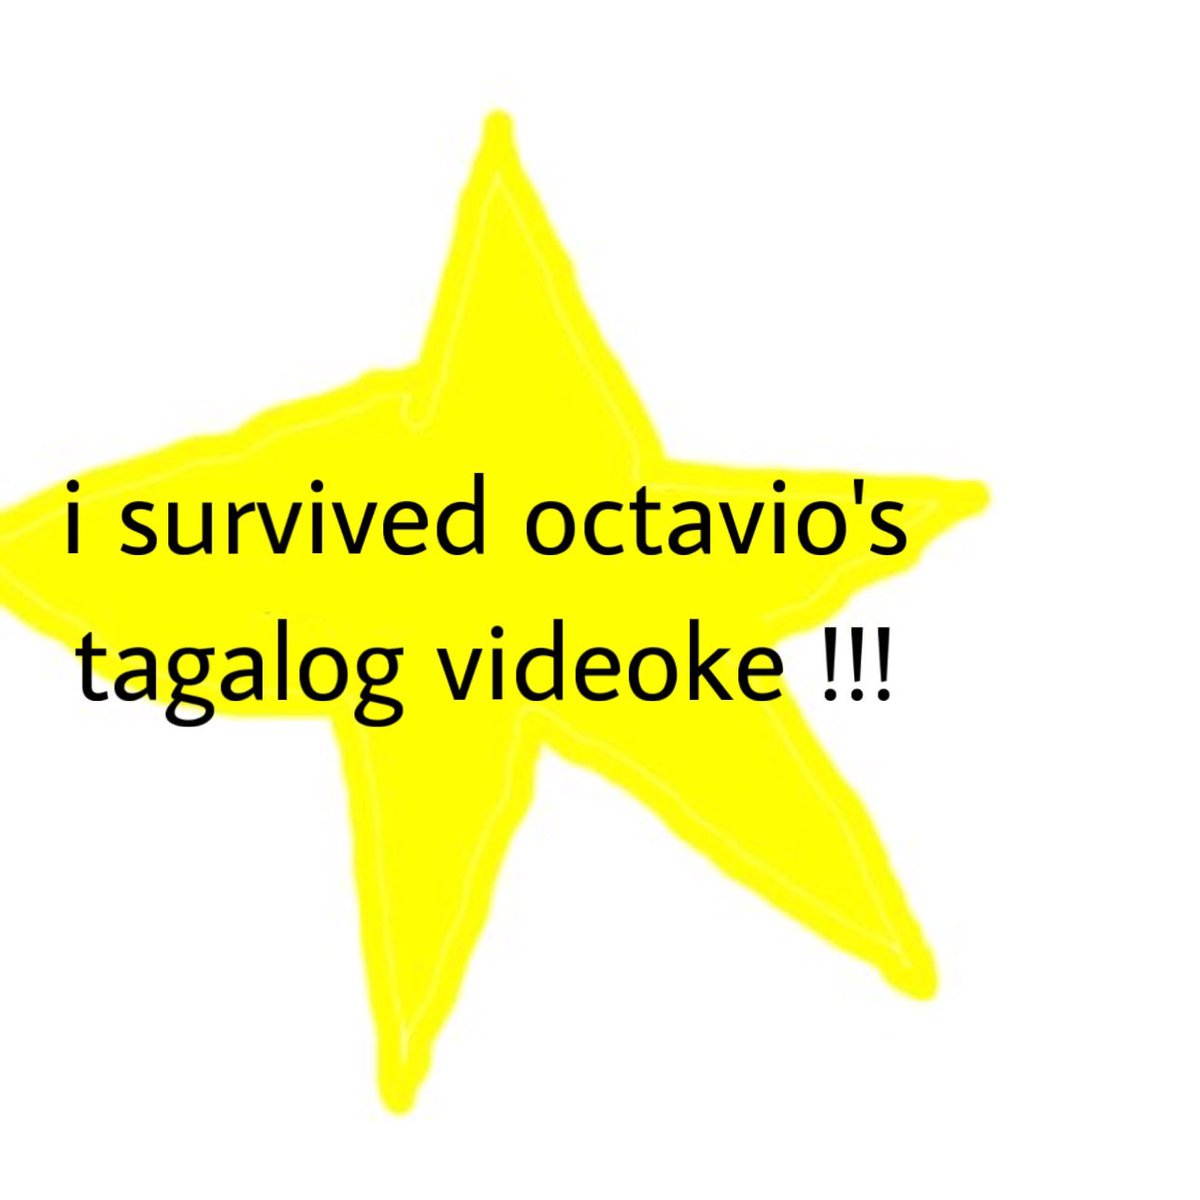 we survived octoposse ! (i forgot to post this last night)
#OctoSus #OctLIVEo